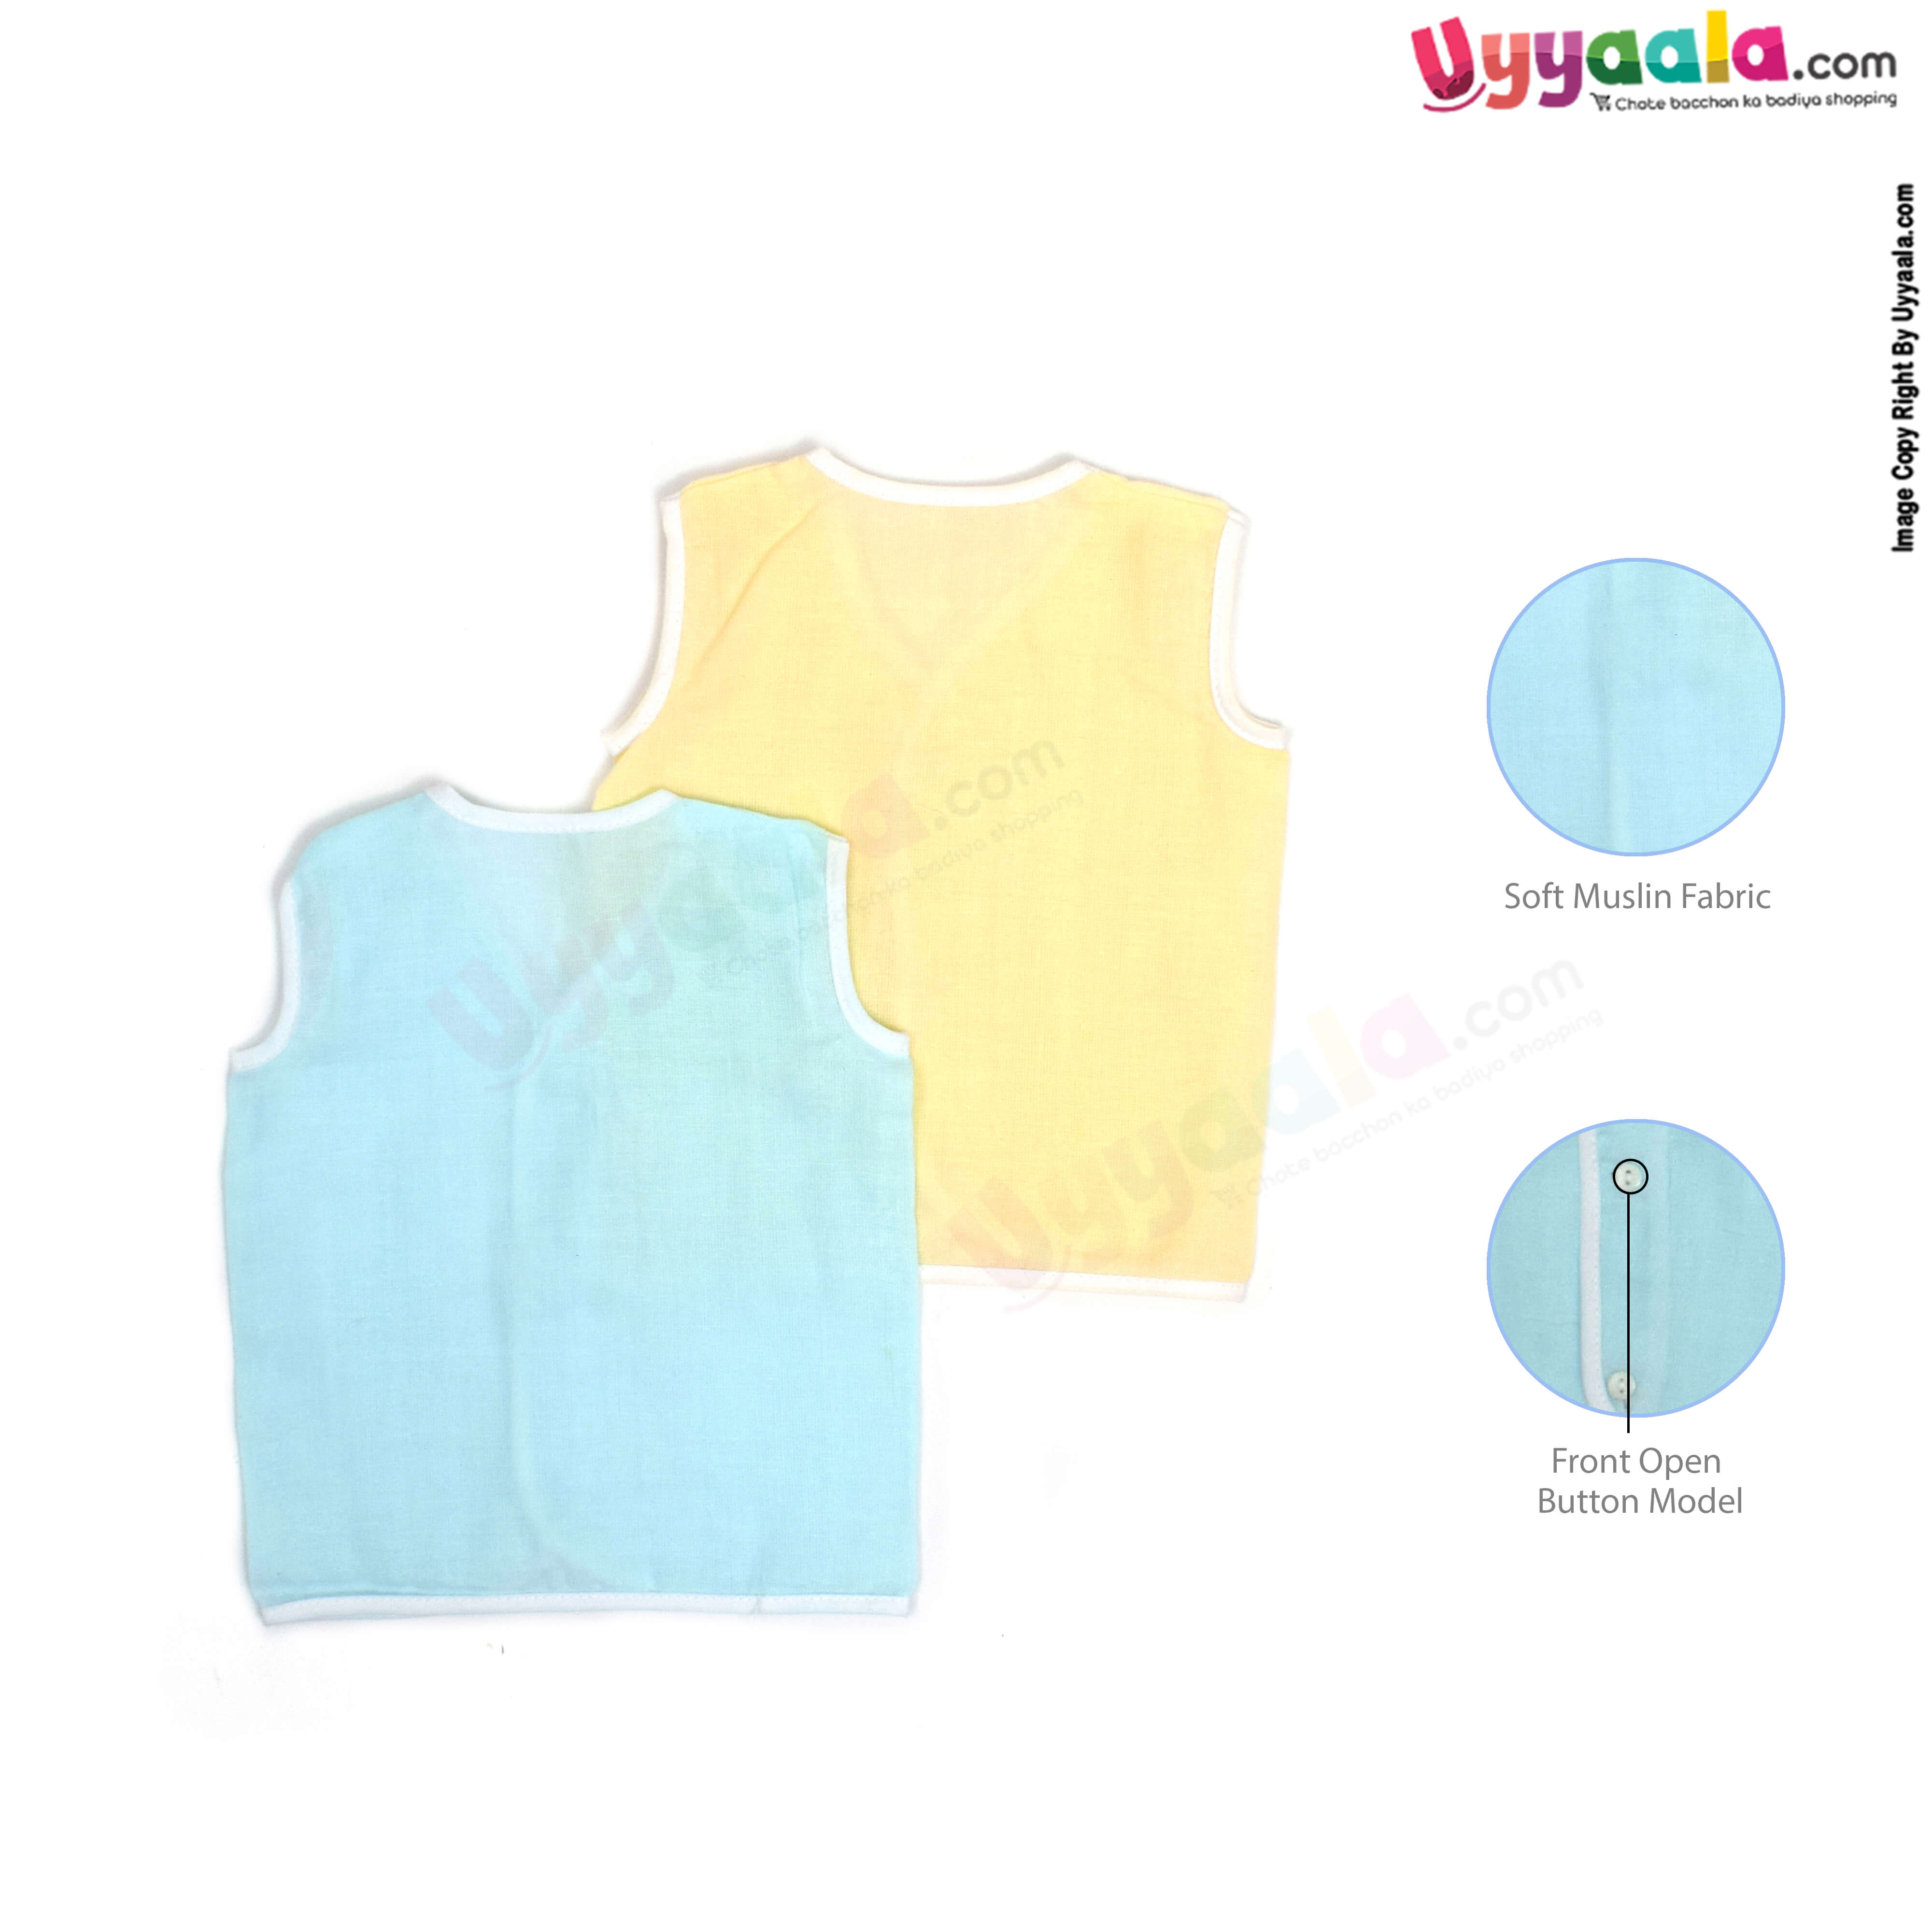 POLAR CUBS Sleeveless Baby Jabla Set, Front Opening Button Model, Premium Quality Muslin Cotton Baby Wear, 2 Pack - Yellow & Blue